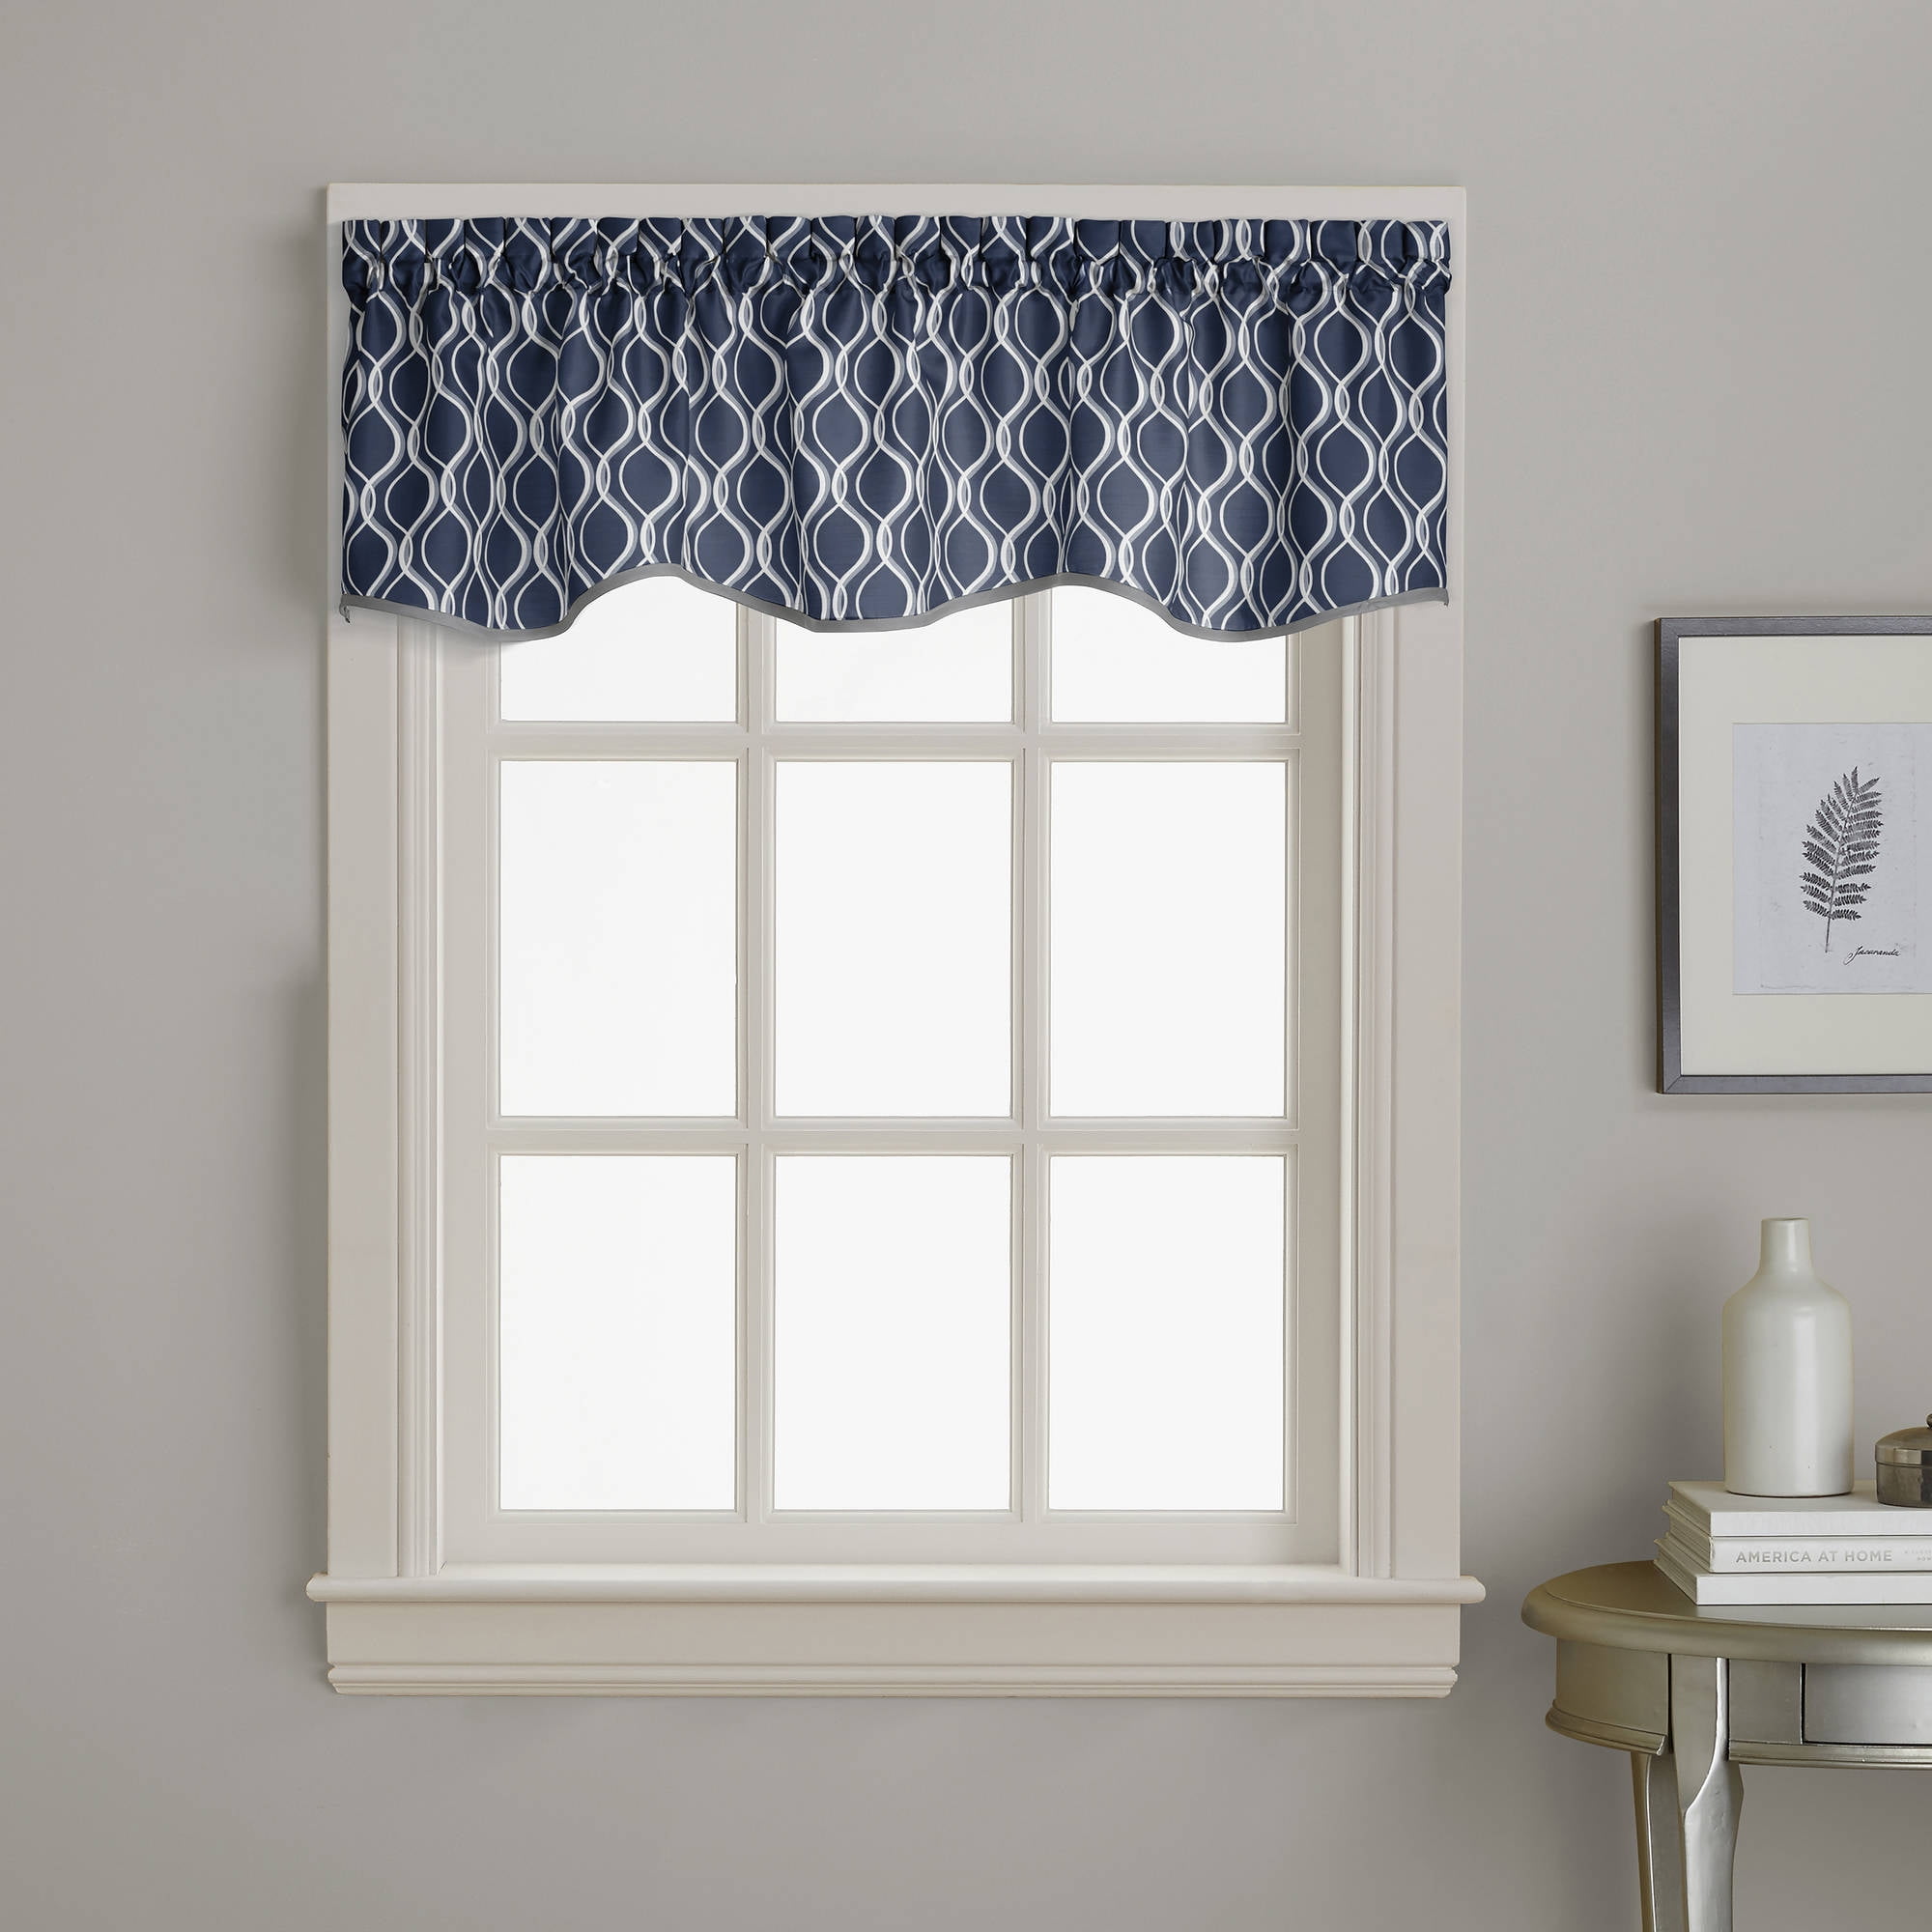 Details about   1/2/4 Panel Morocco Voile Net Window Curtains Valance Draps Living Room Bedroom 